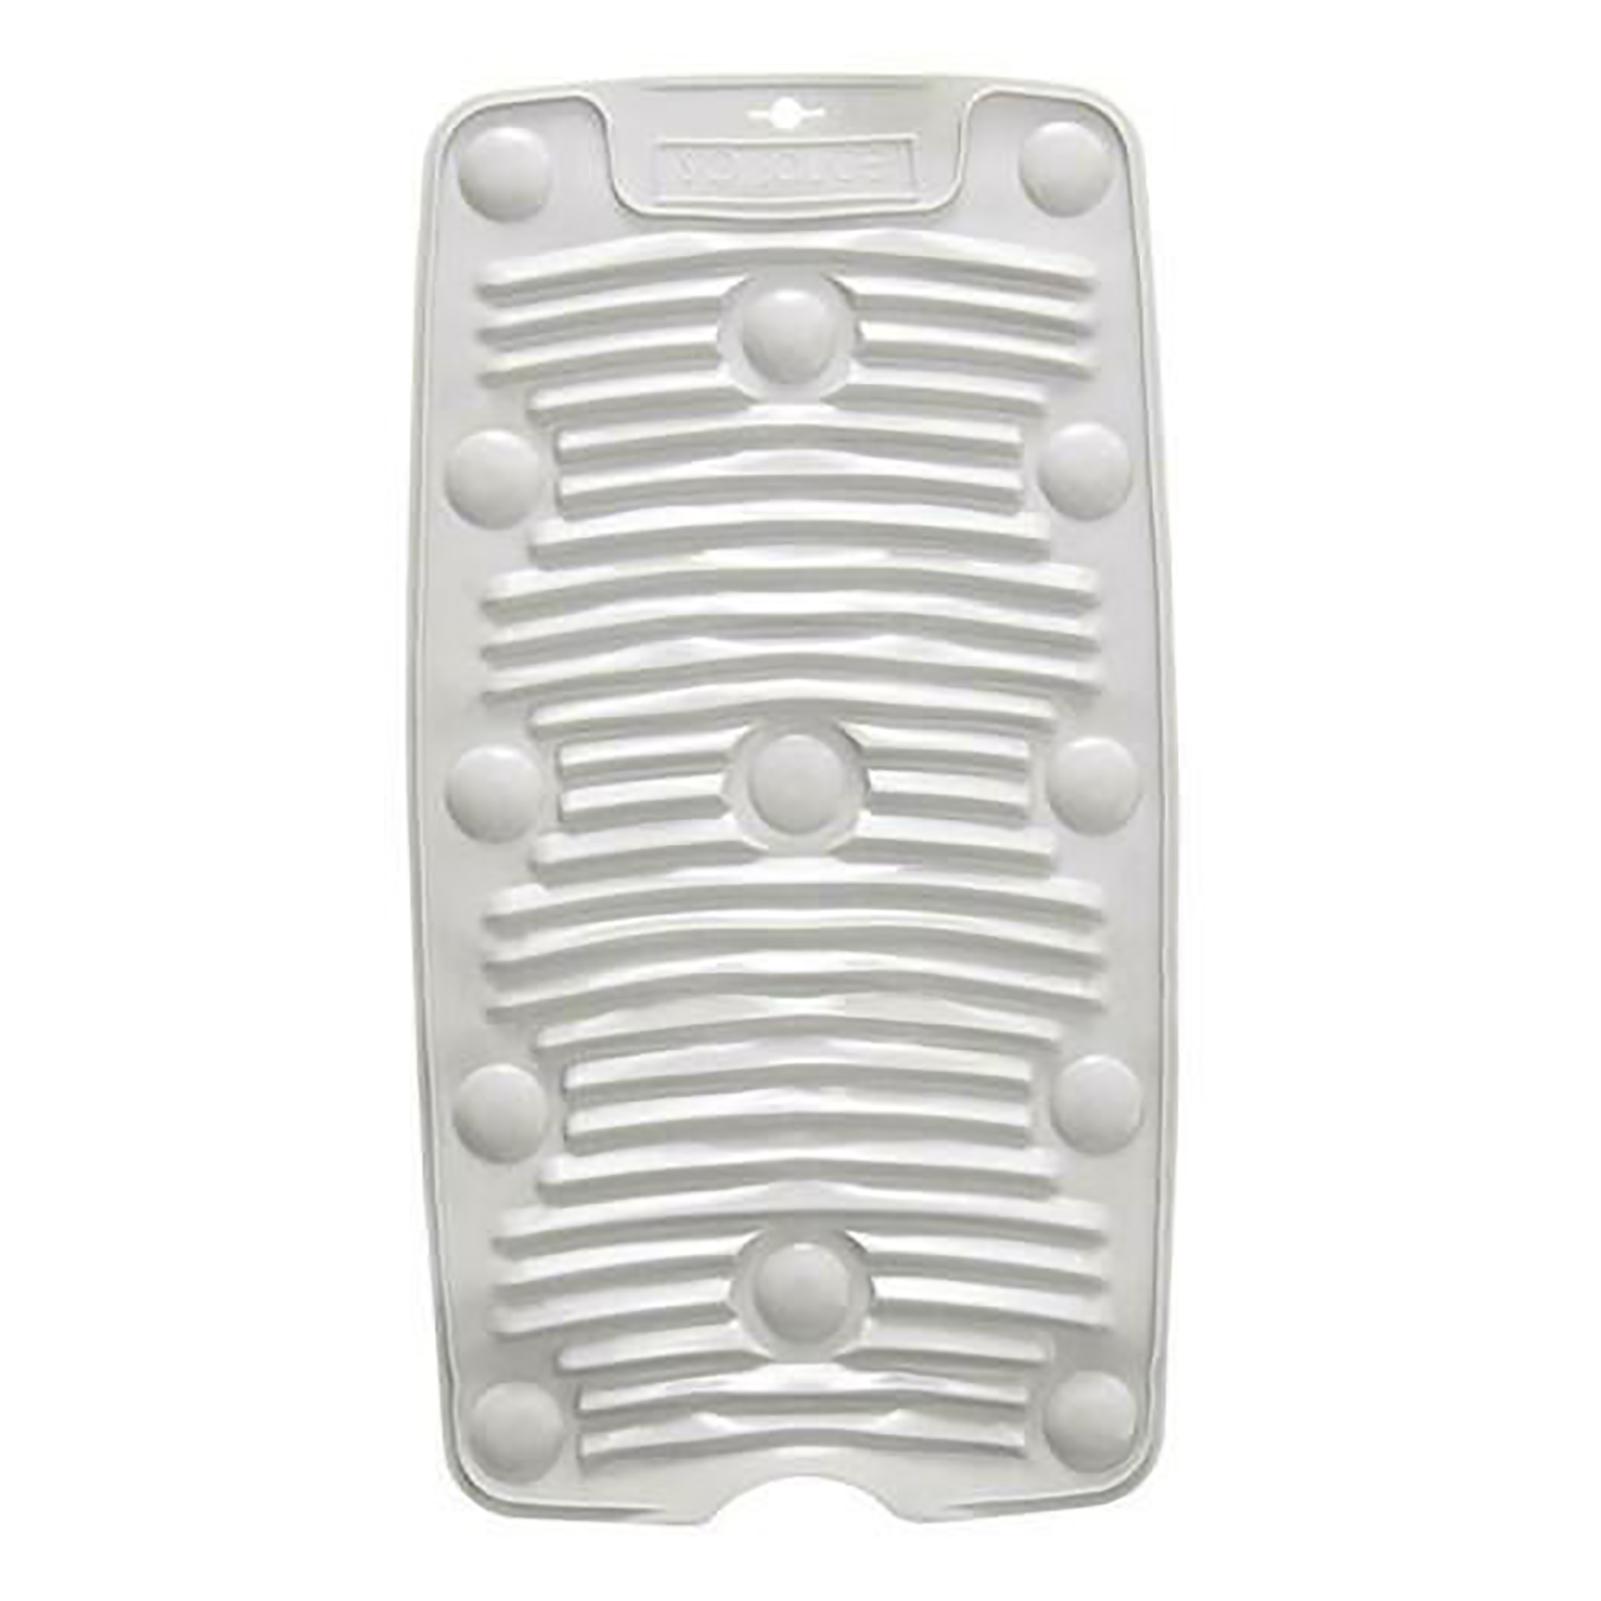 New Hand-held Foldable Silicone Anti-skid Washboard Clothes Washing Cleaning Tool Scrubboard